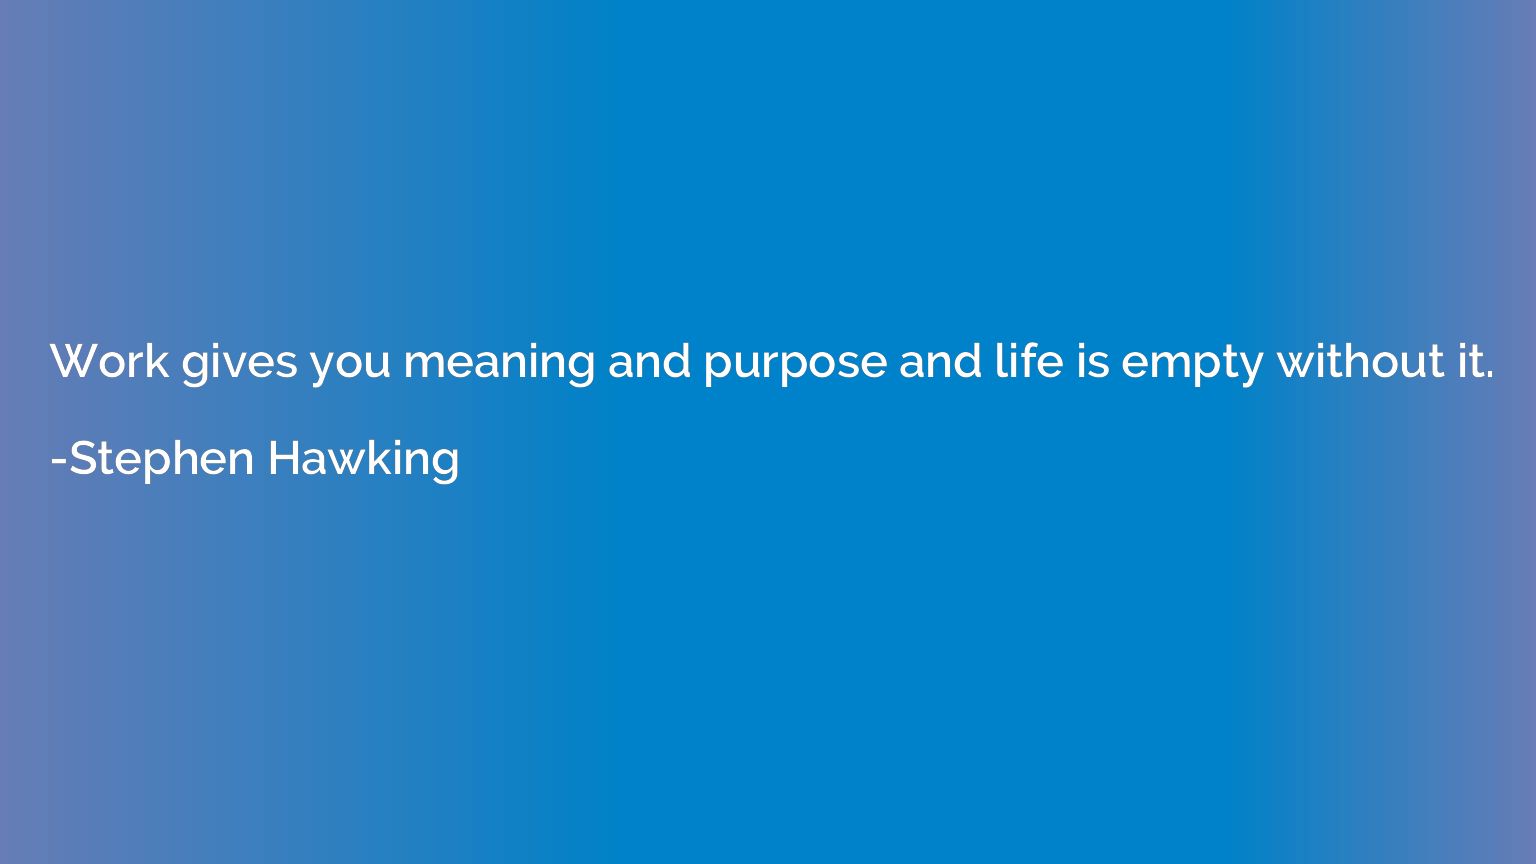 Work gives you meaning and purpose and life is empty without